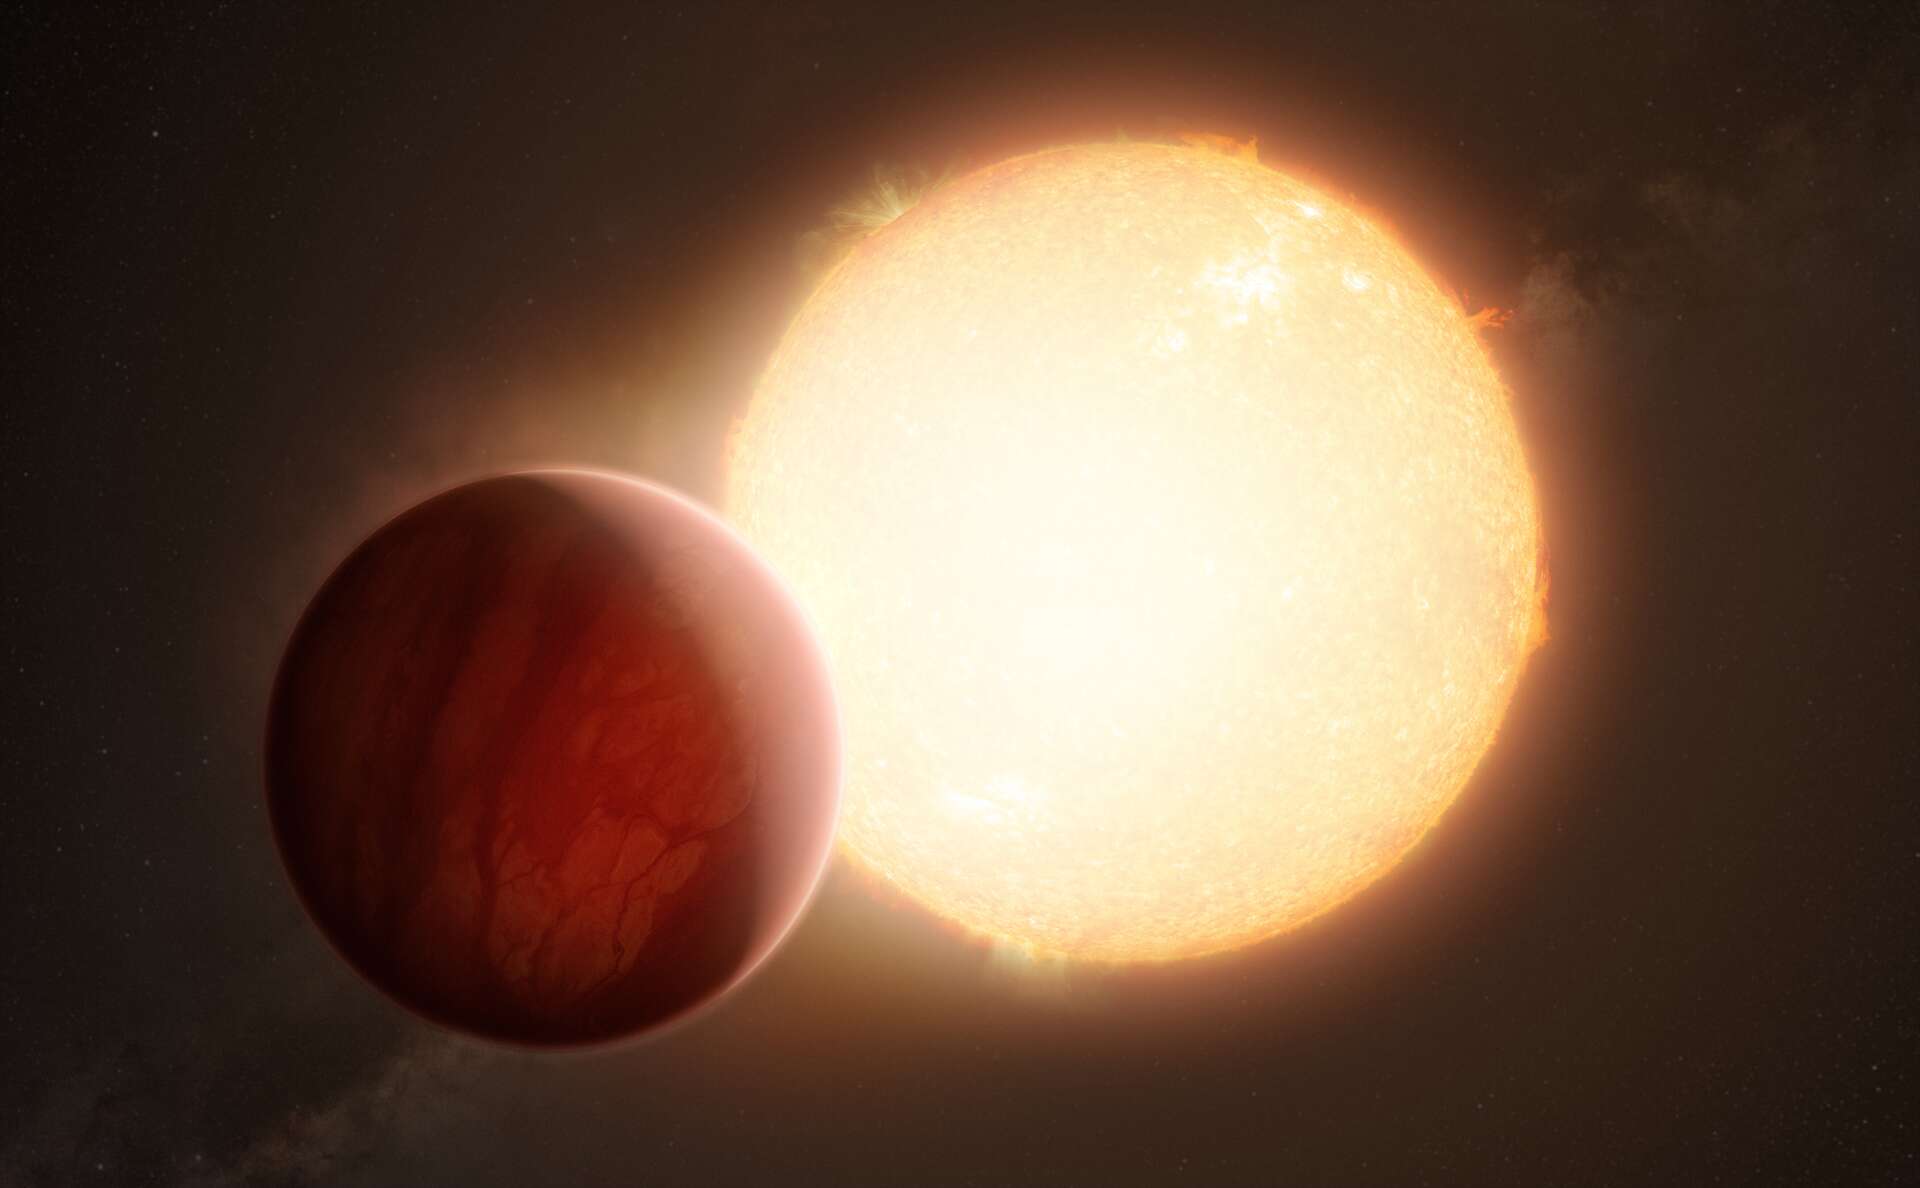 This planet is getting dangerously close to its dying star